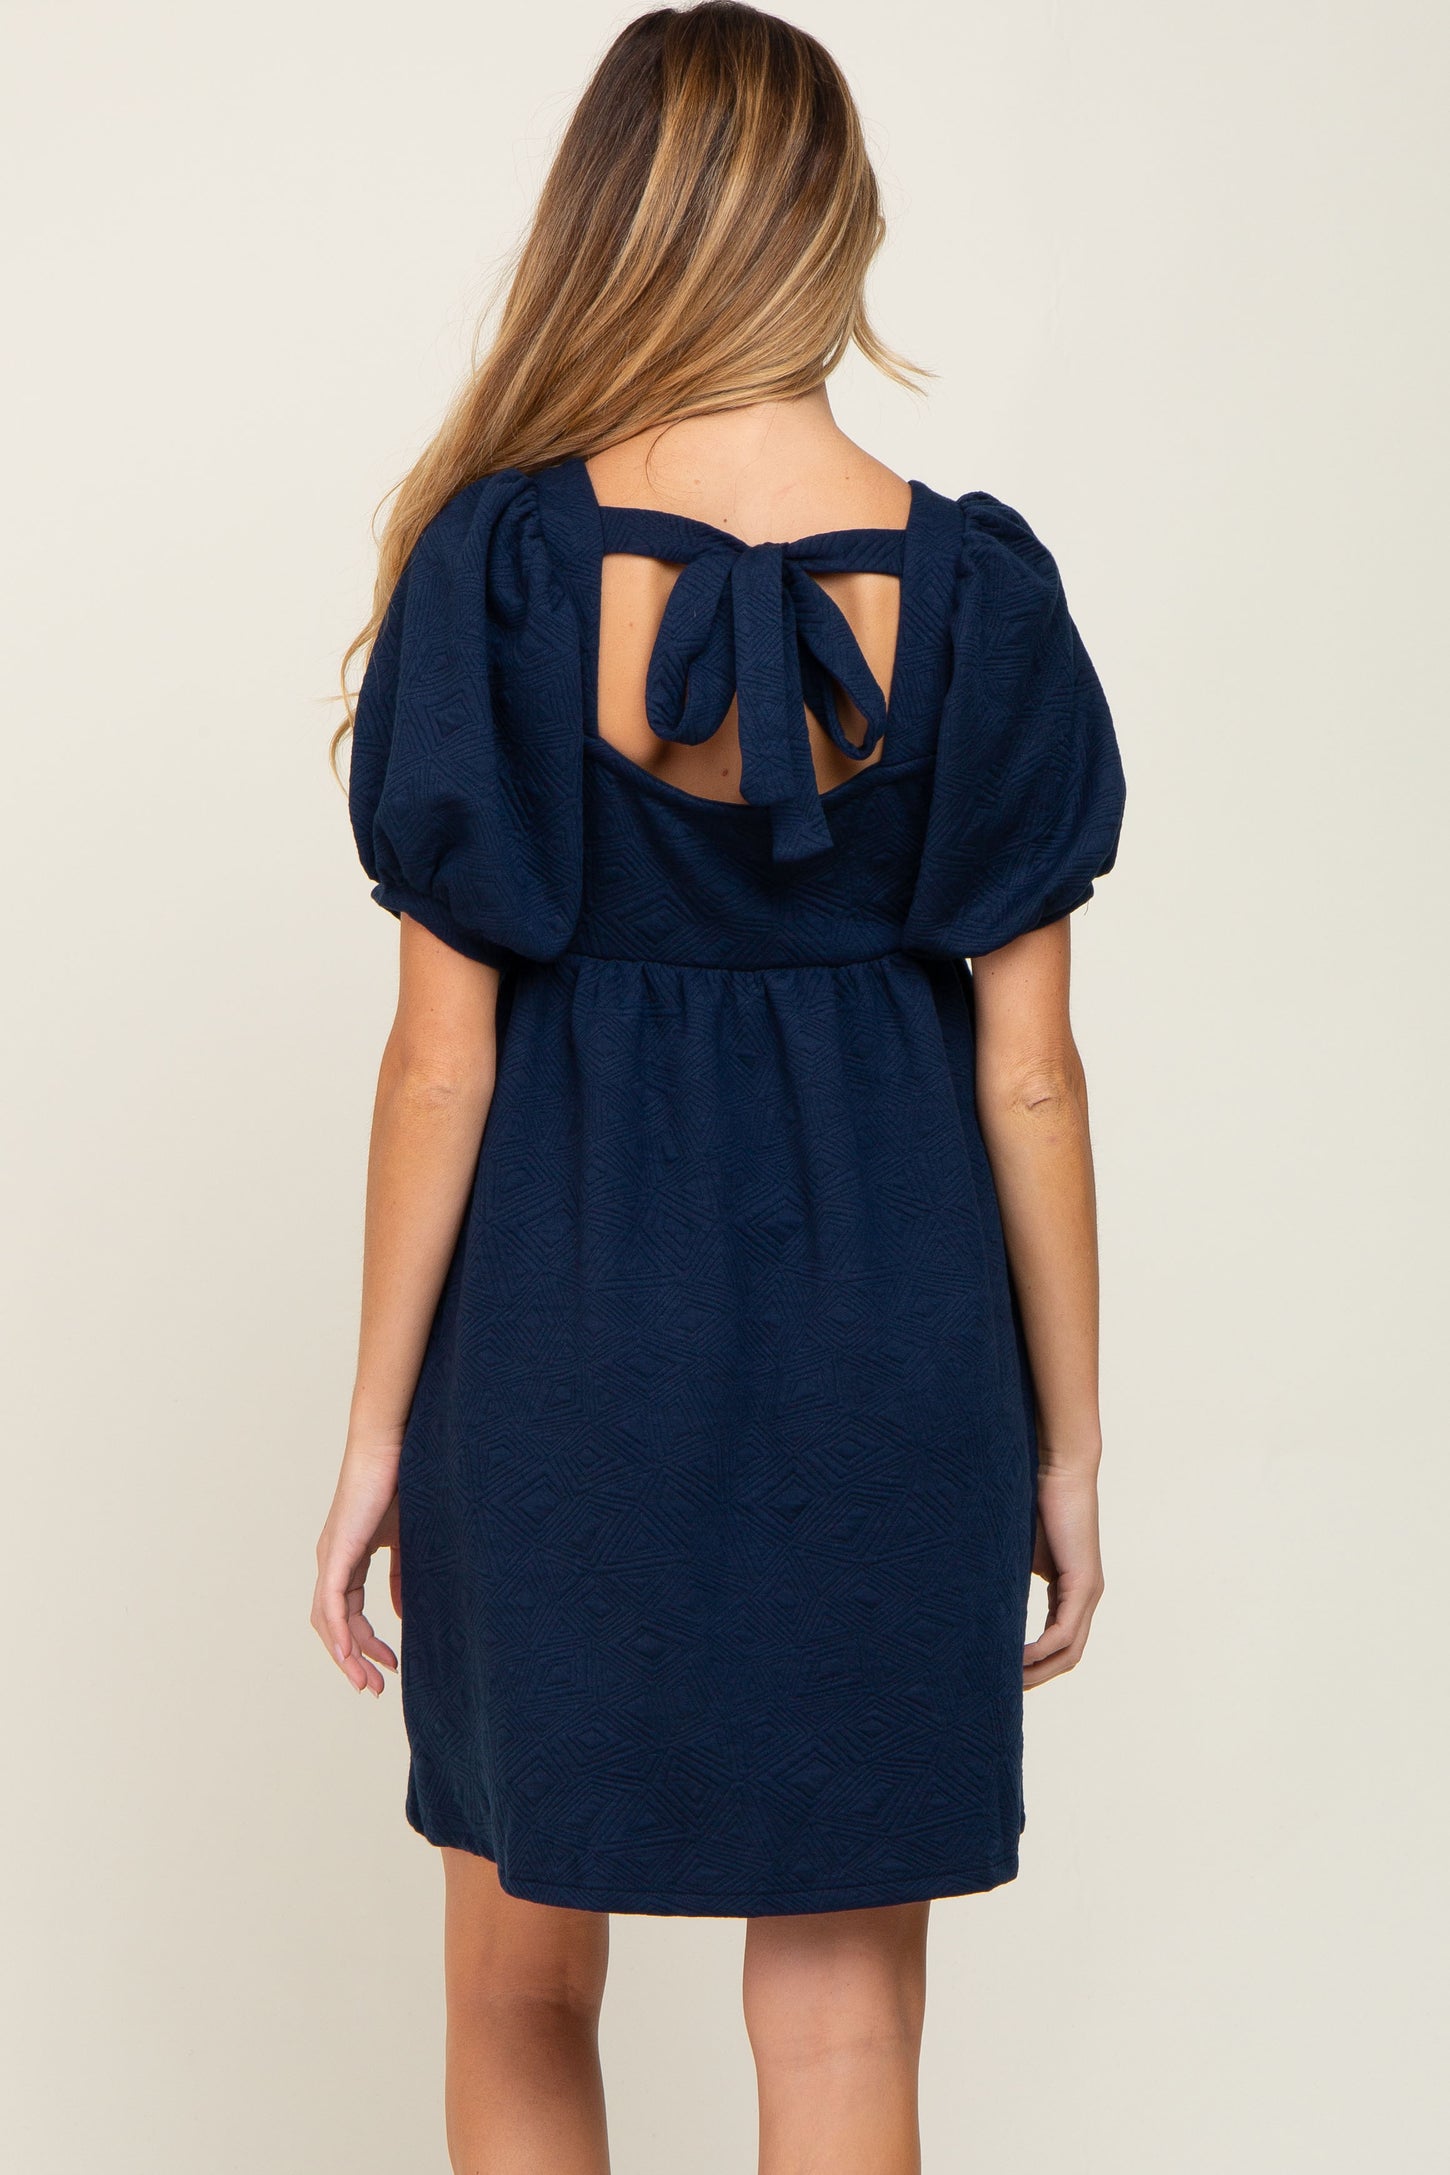 Navy Embroidered Tie Back Maternity Dress